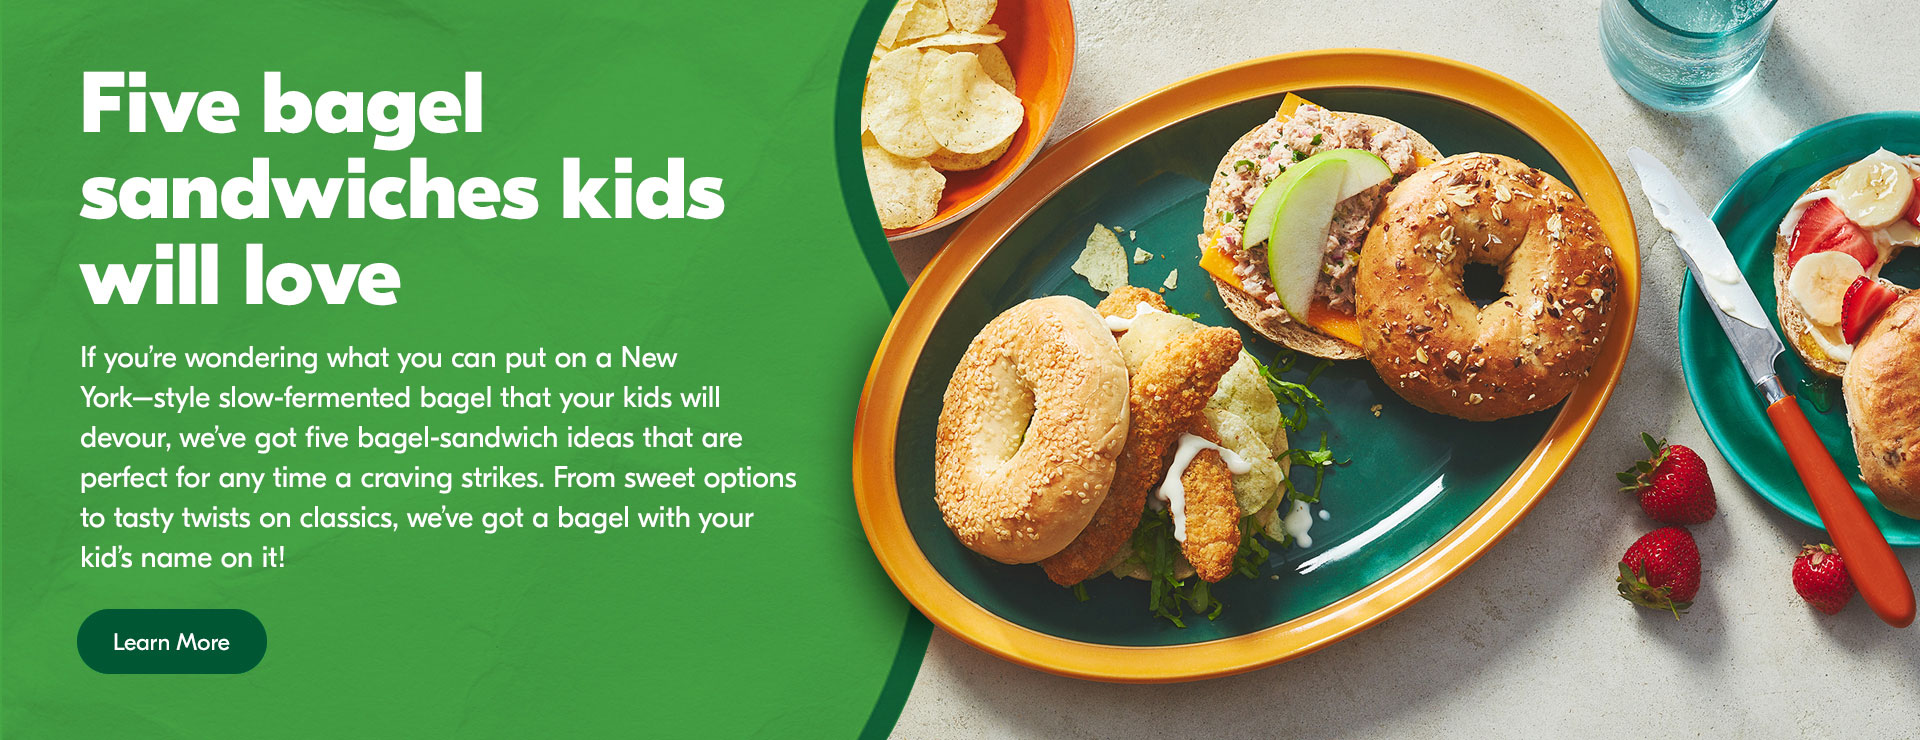 Text Reading 'Five bagel sandwiches kids will love. If you're wondering what you can put on a New York-style slow-fermented bagel that your kids will devour, we've got five bagel-sandwich ideas that are perfect for any time a craving strikes. From sweet options to tasty twists on classics, we've got a bagel with your kid's name on it! 'Learn More' from the button below.